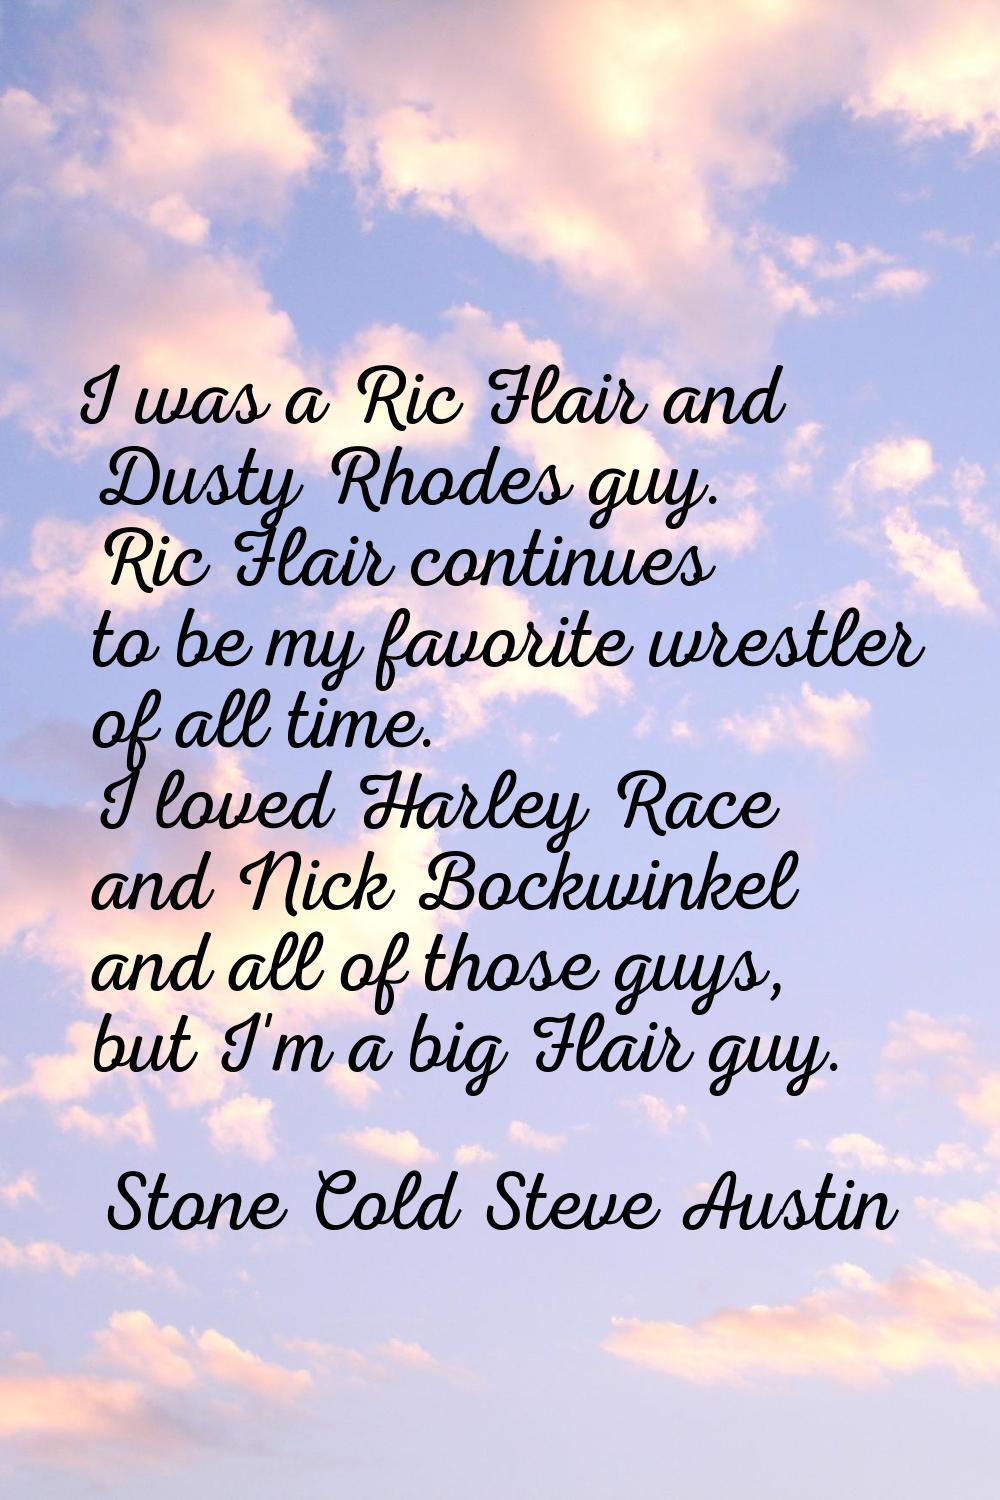 I was a Ric Flair and Dusty Rhodes guy. Ric Flair continues to be my favorite wrestler of all time.